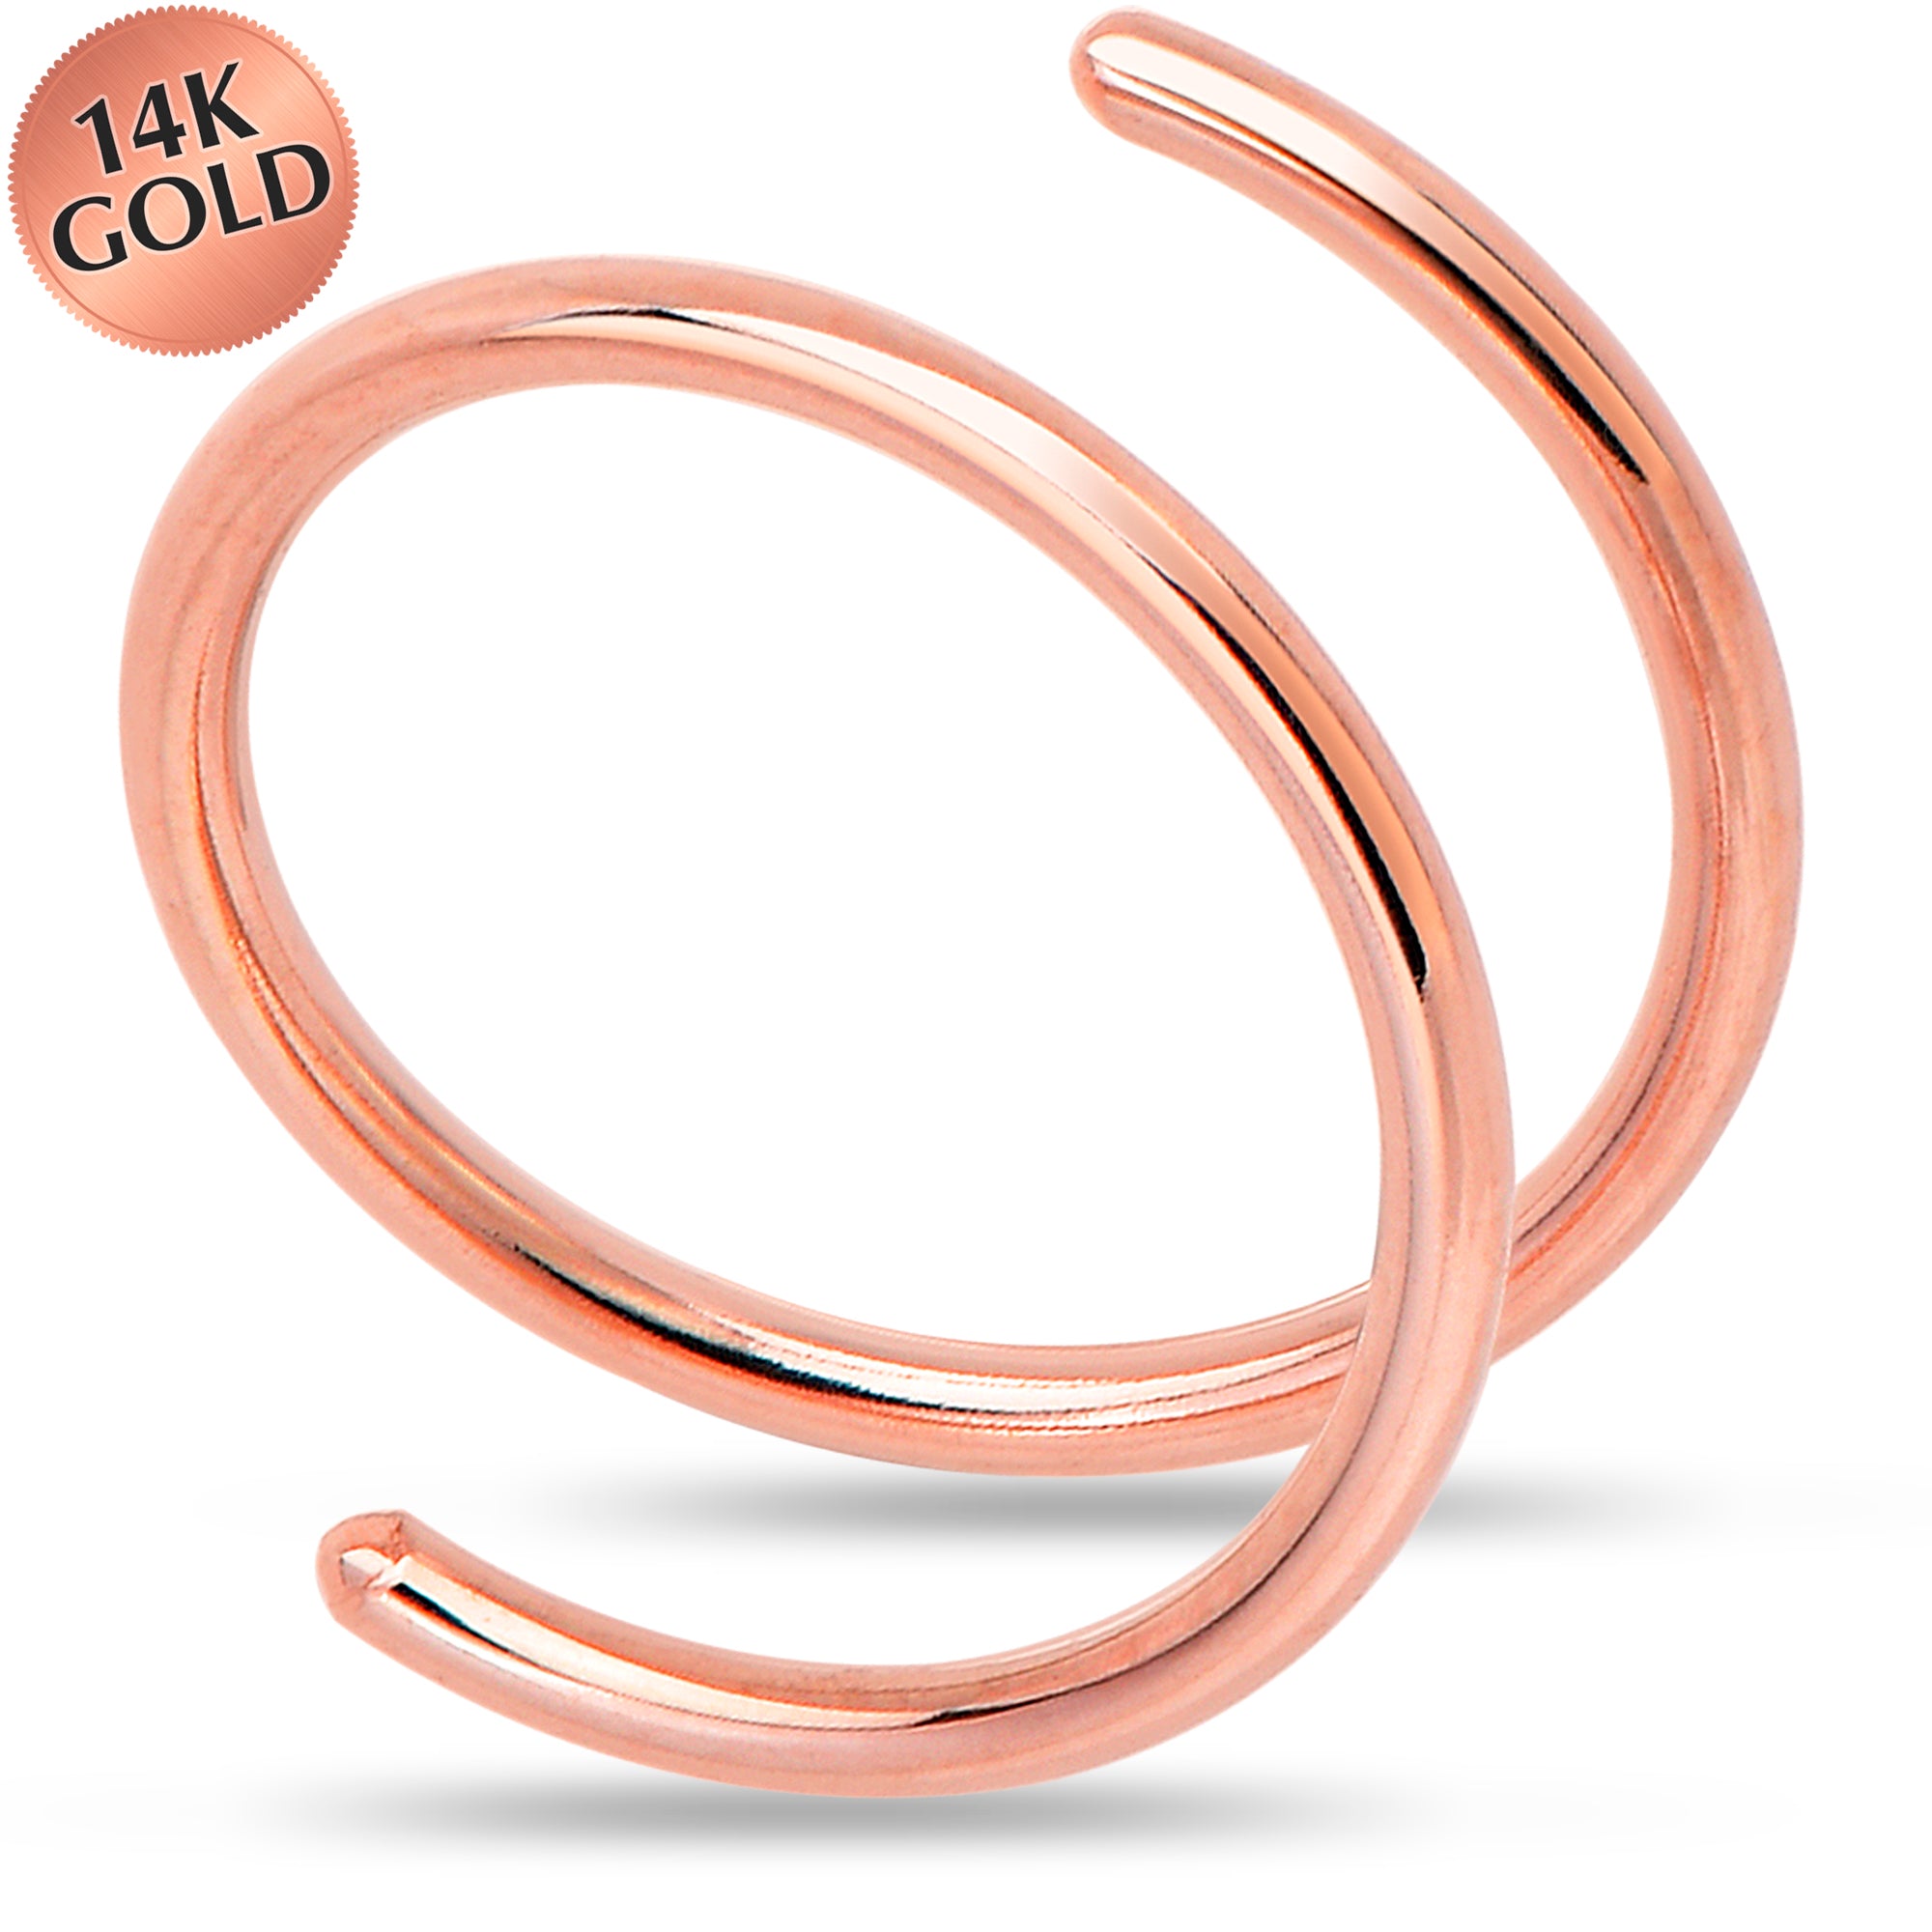 14k Solid Rose Gold Double Hoop Nose Spiral Nose Ring (Select your Size)